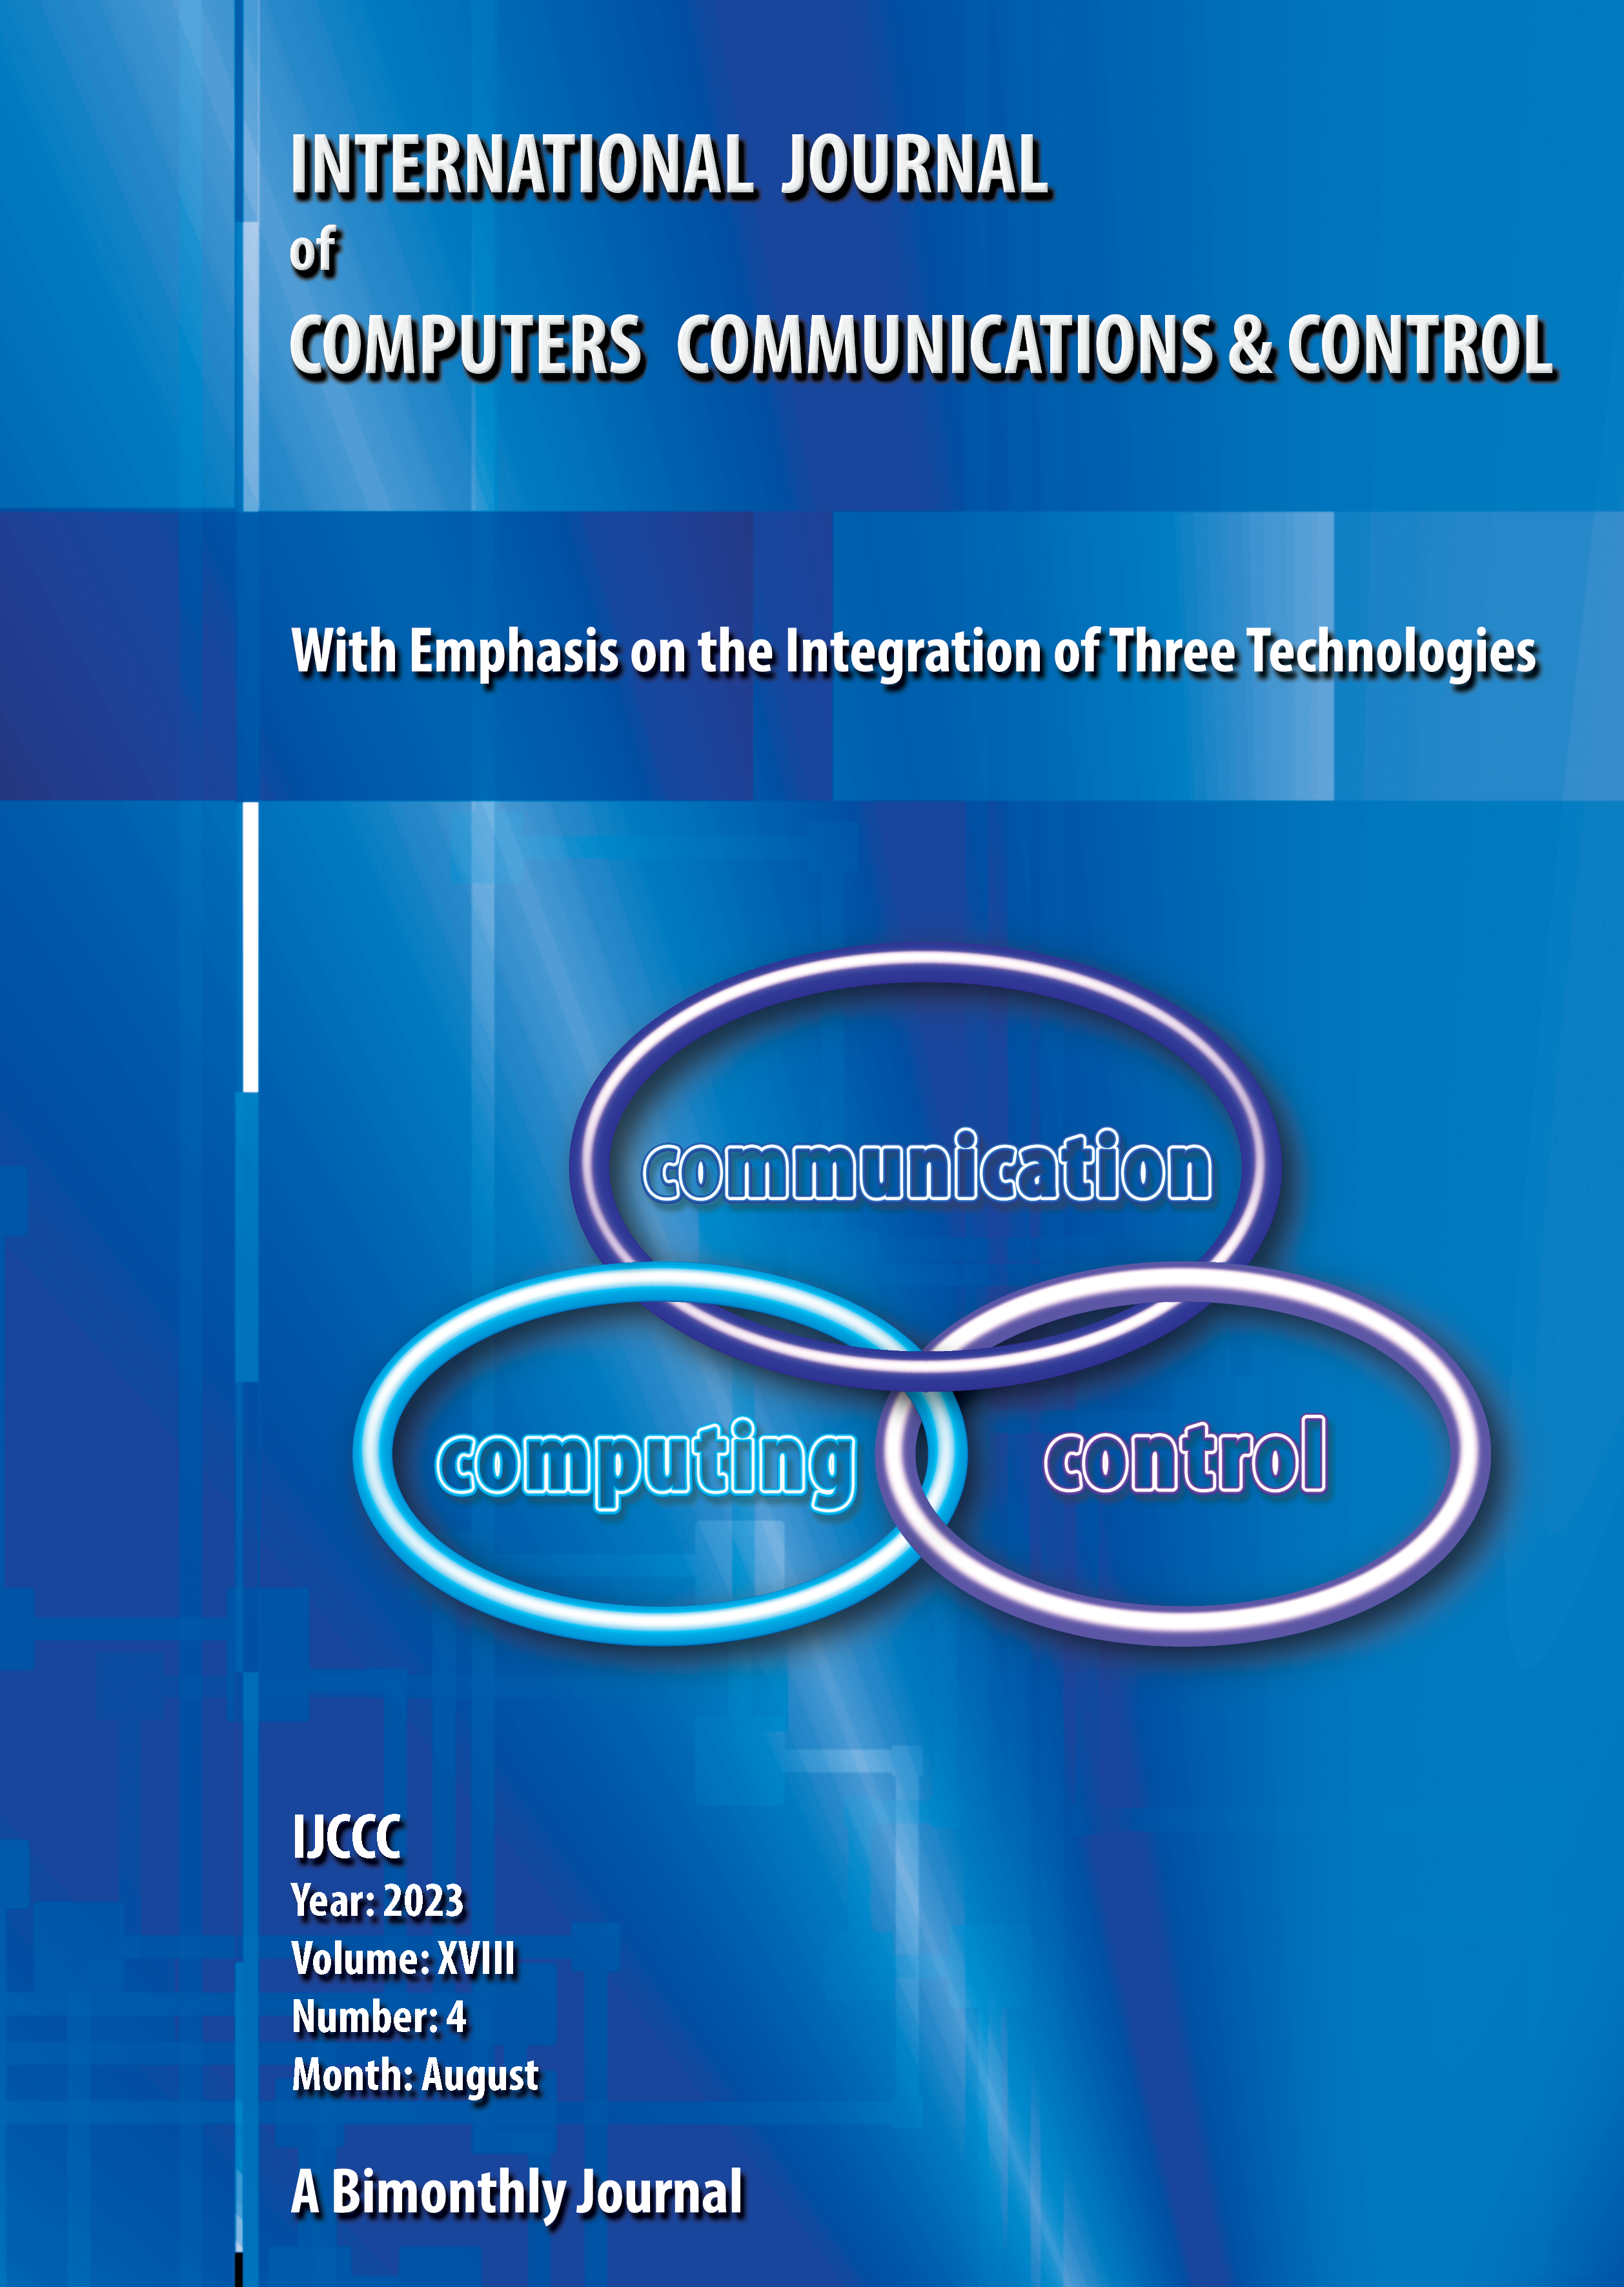 					View Vol. 18 No. 4 (2023): International Journal of Computers Communications & Control (August)
				